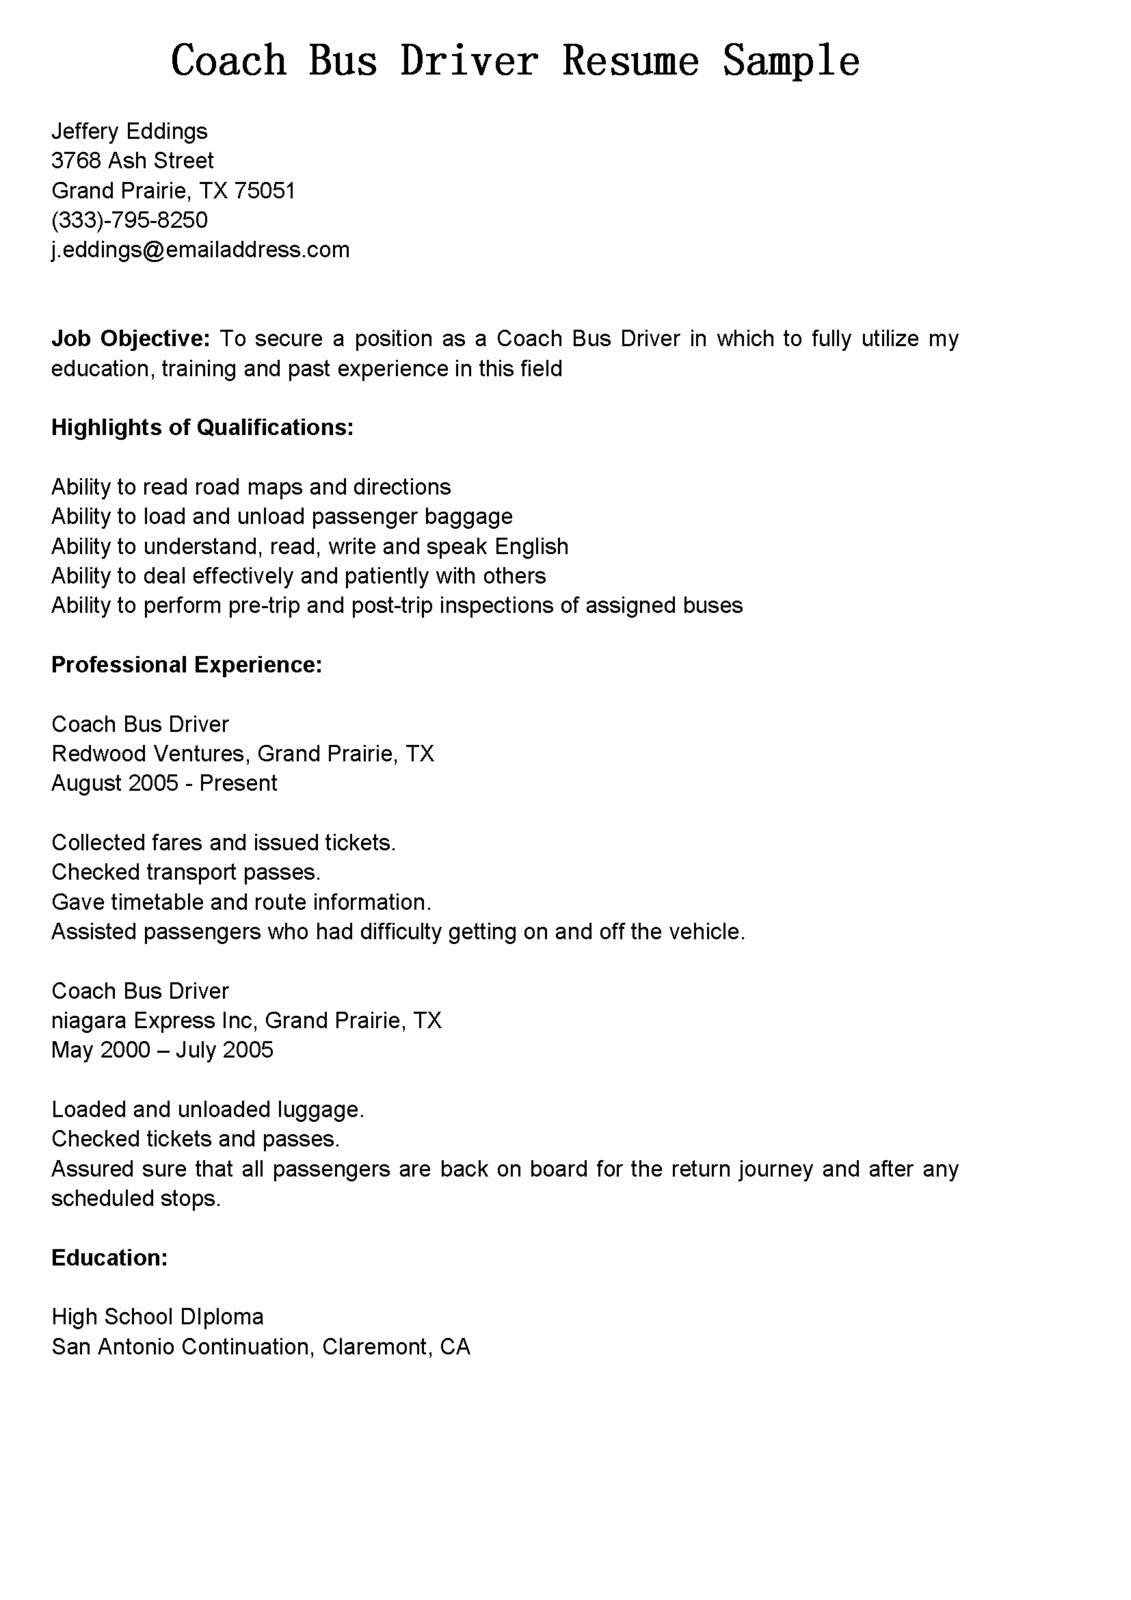 sample resume for personal driverml